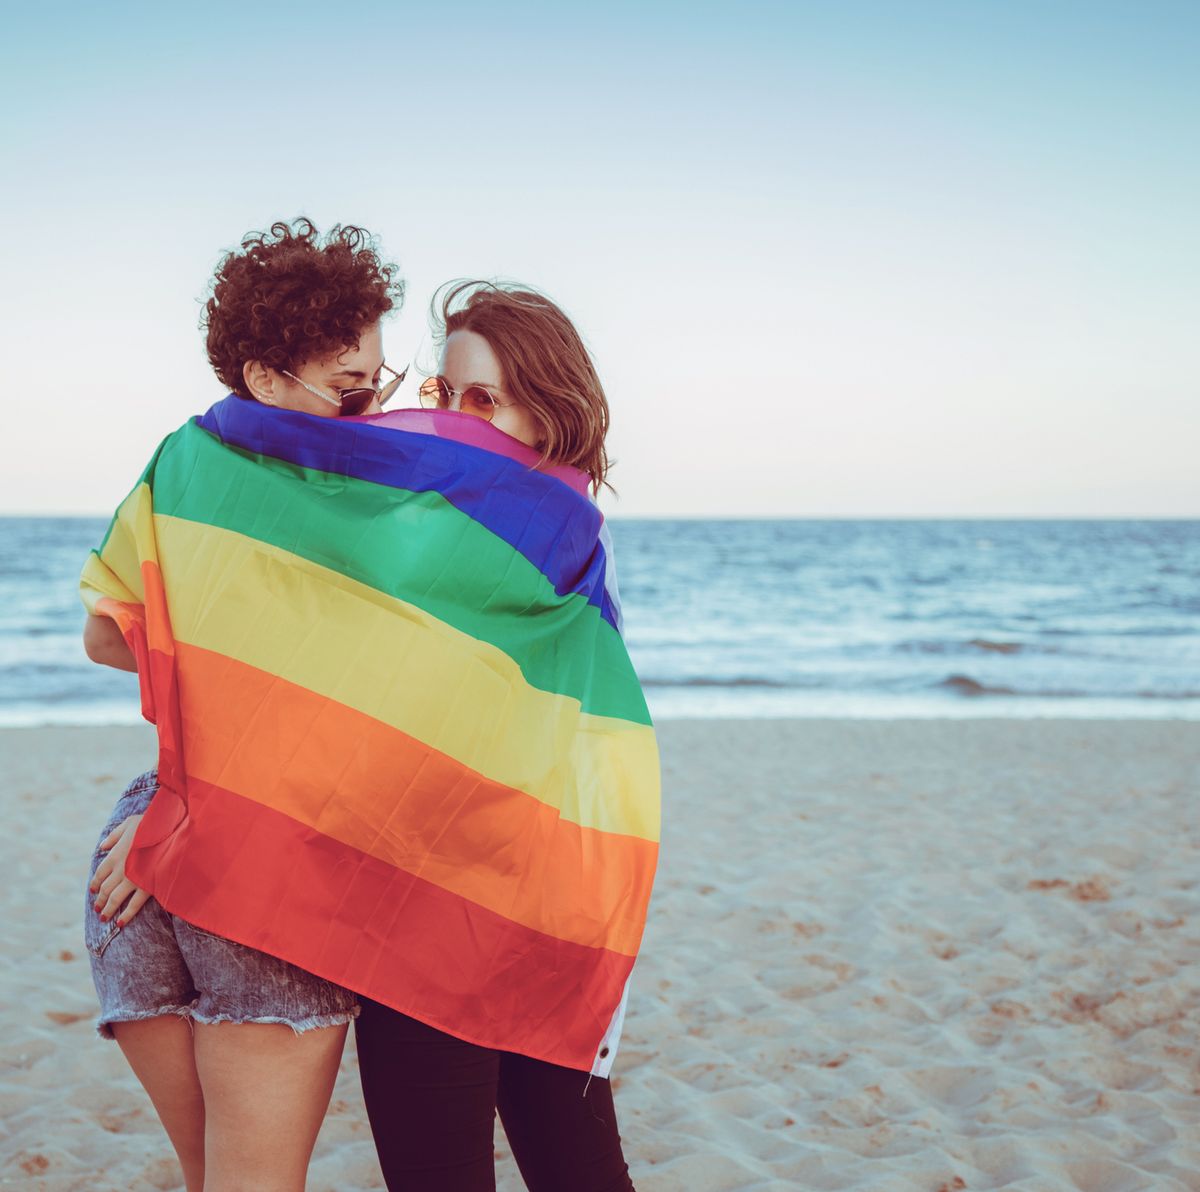 Couples Naked Beach Fun - Am I Bisexual?' 10 Bisexuality Signs, According To Experts